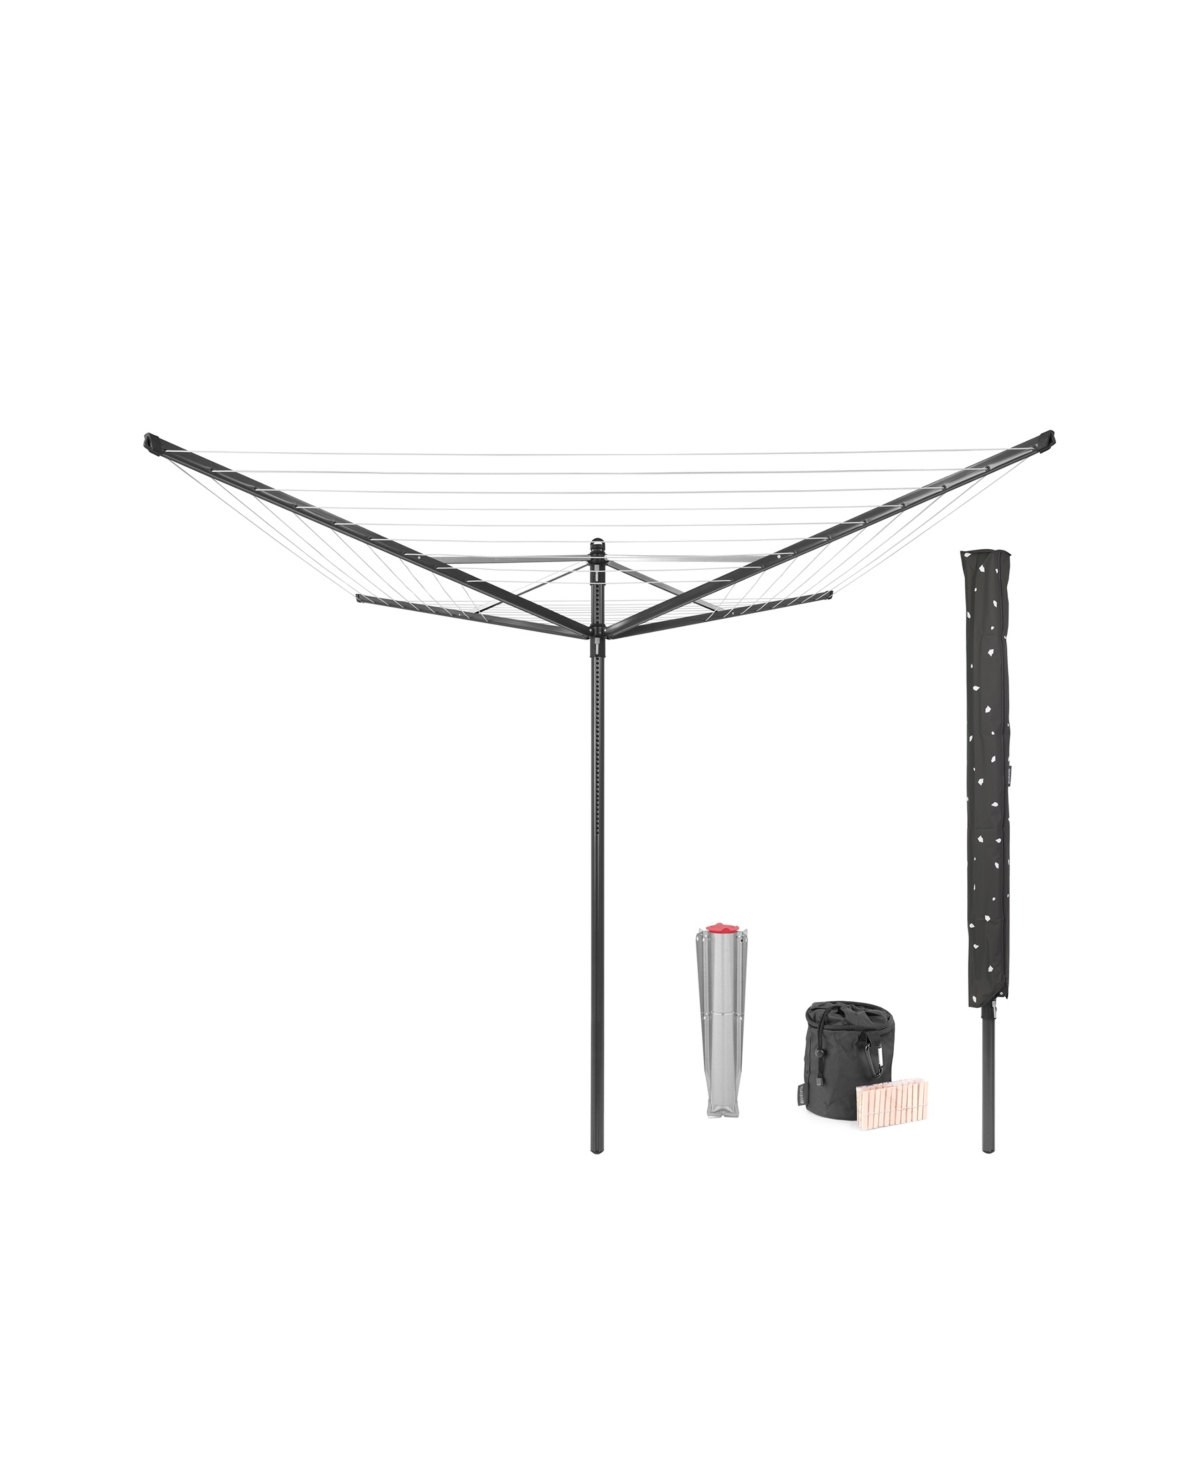 Rotary Lift-o-Matic Clothesline - 164', 50 Meter with Metal Ground Spike, Protective Cover, Peg Bag and Wooden Clothespins Set - Anthracite